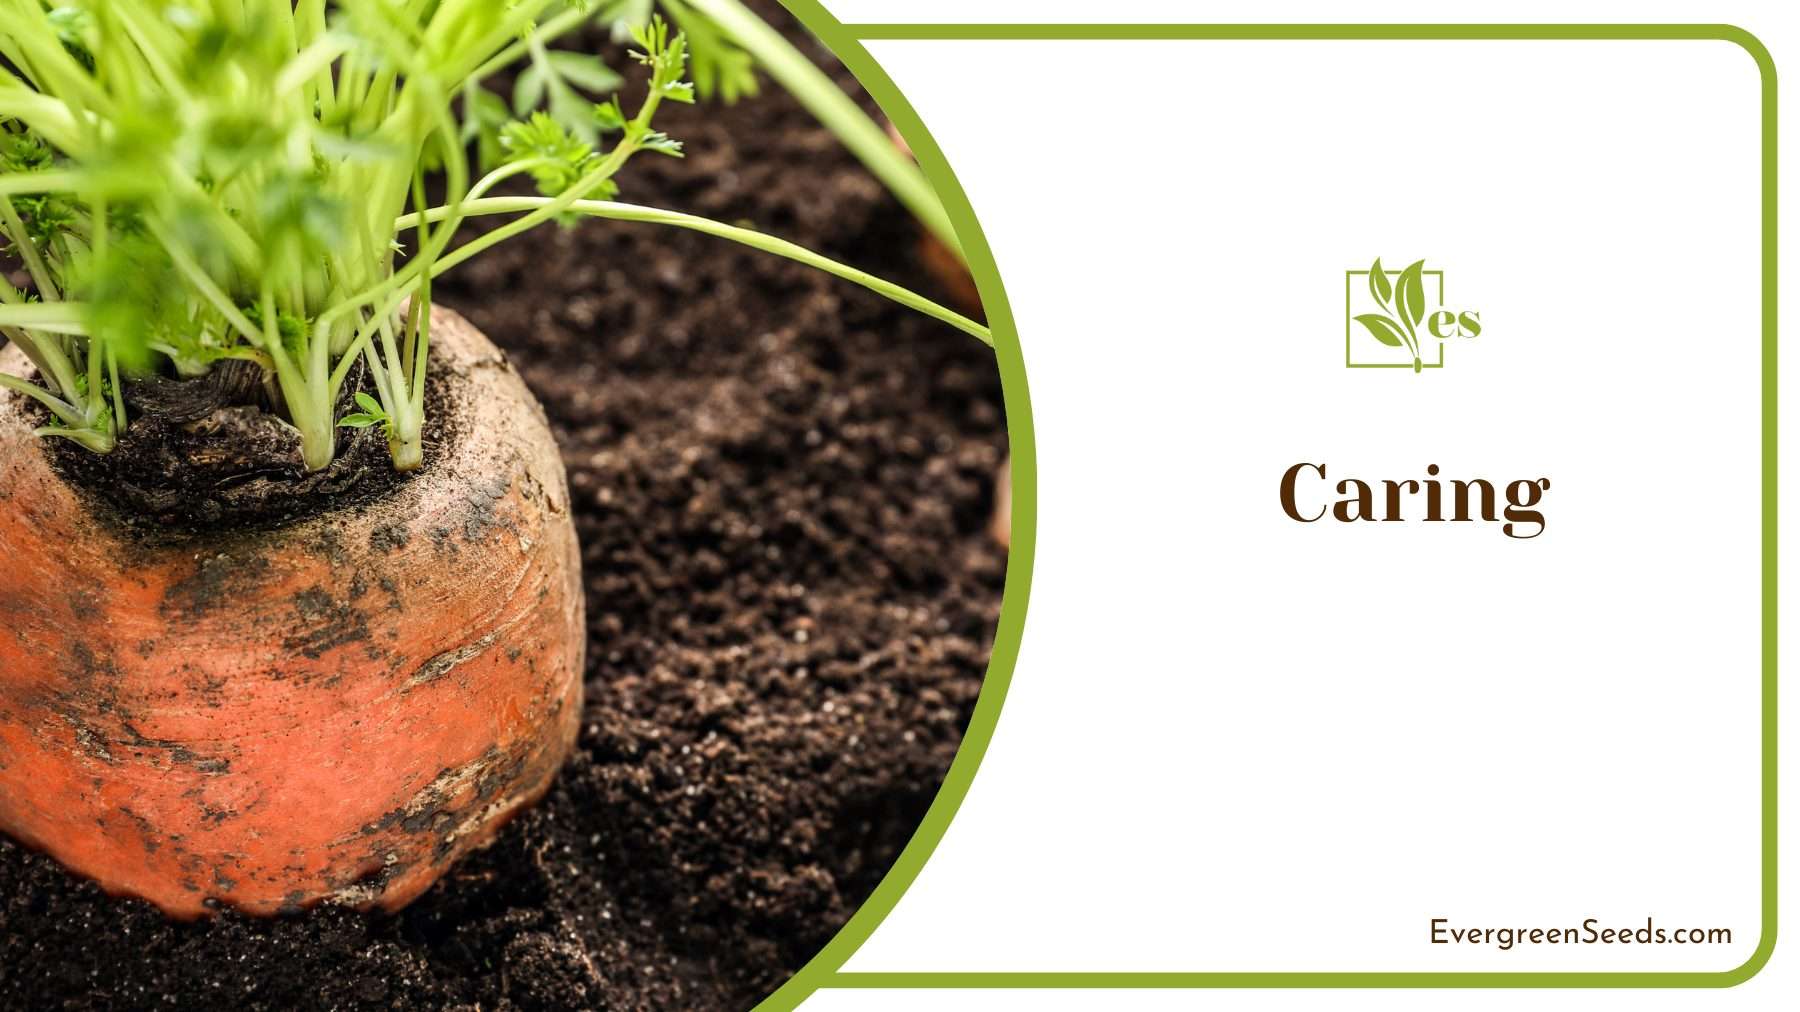 Caring for the Carrot Plant